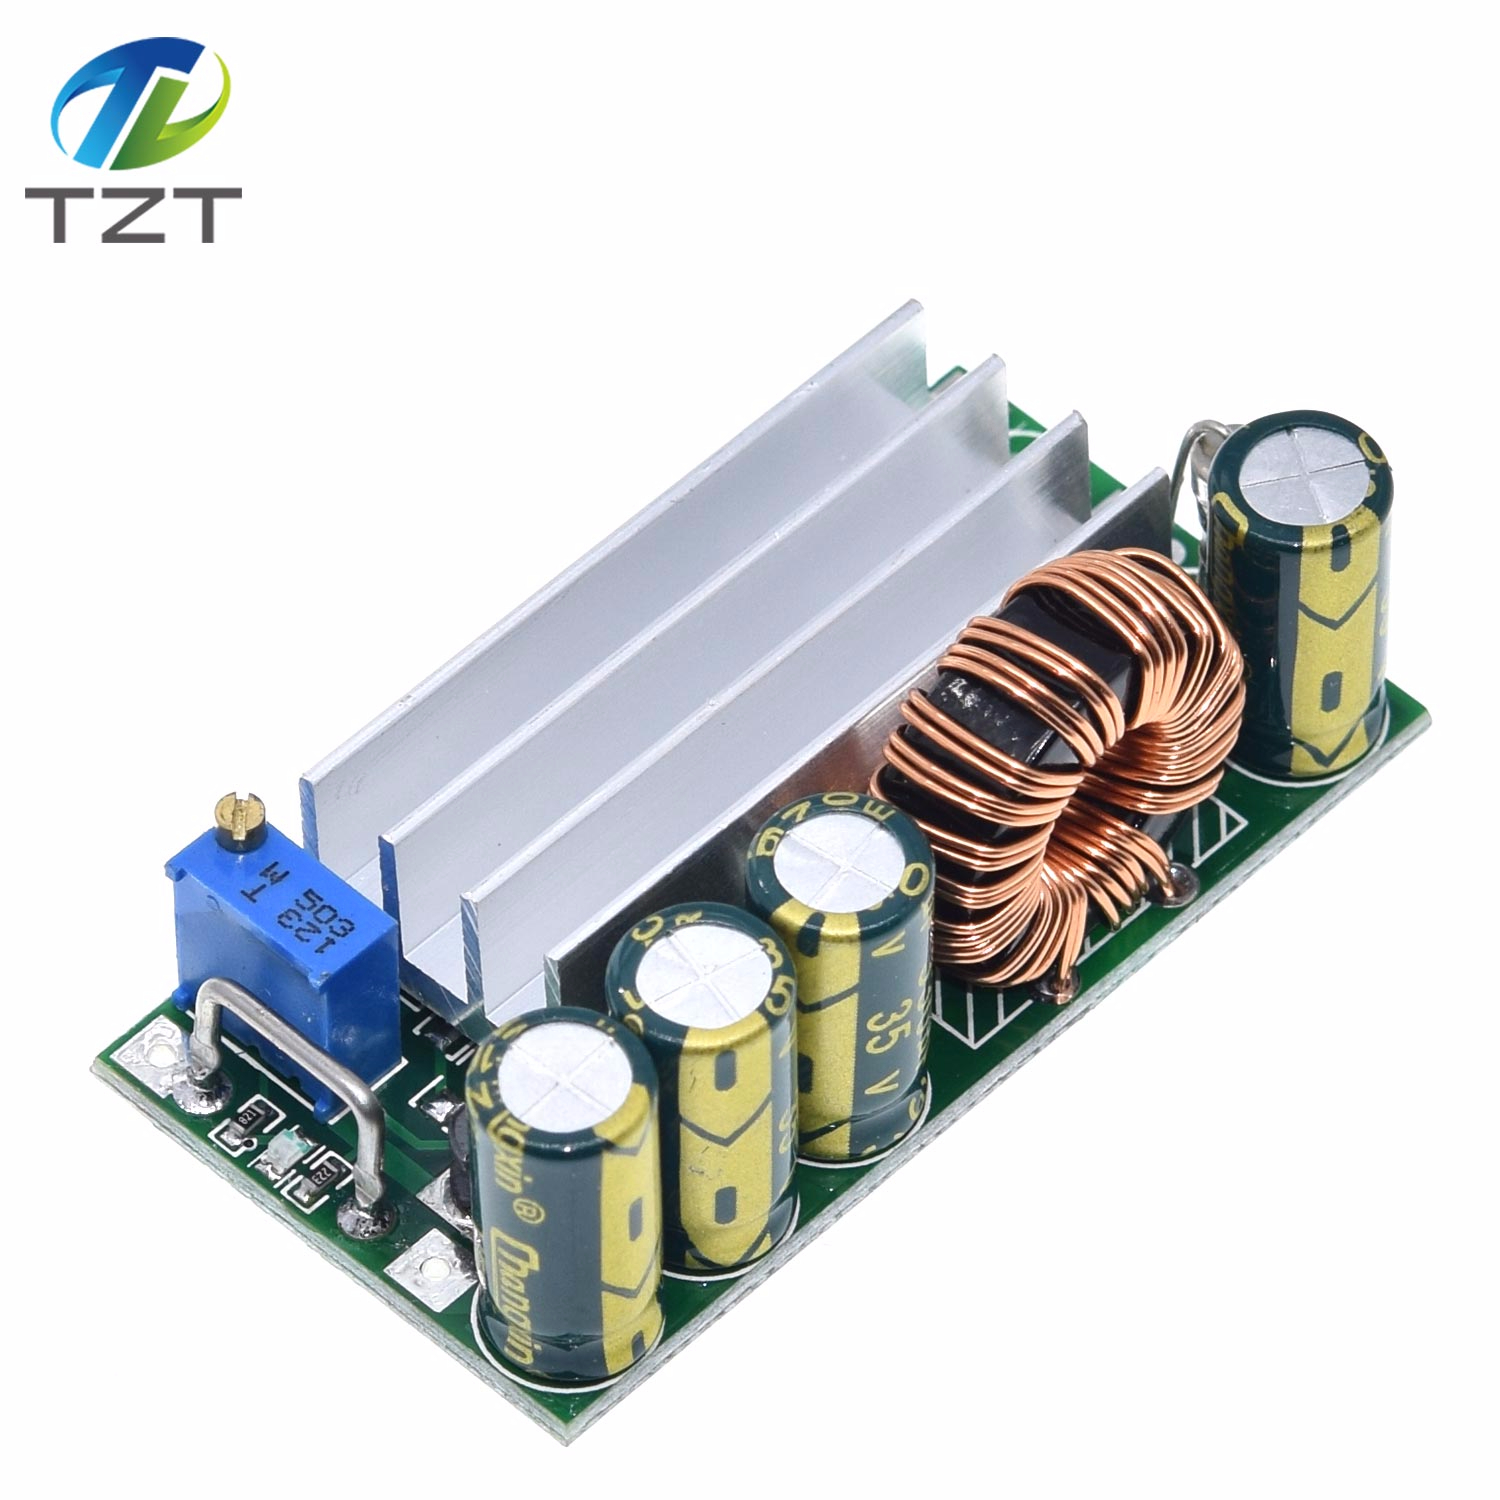 TZT Automatic Step Up Down DC Power Supply AT30 Converter Buck Boost Module Replace XL6009 4-30V To 0.5-30V